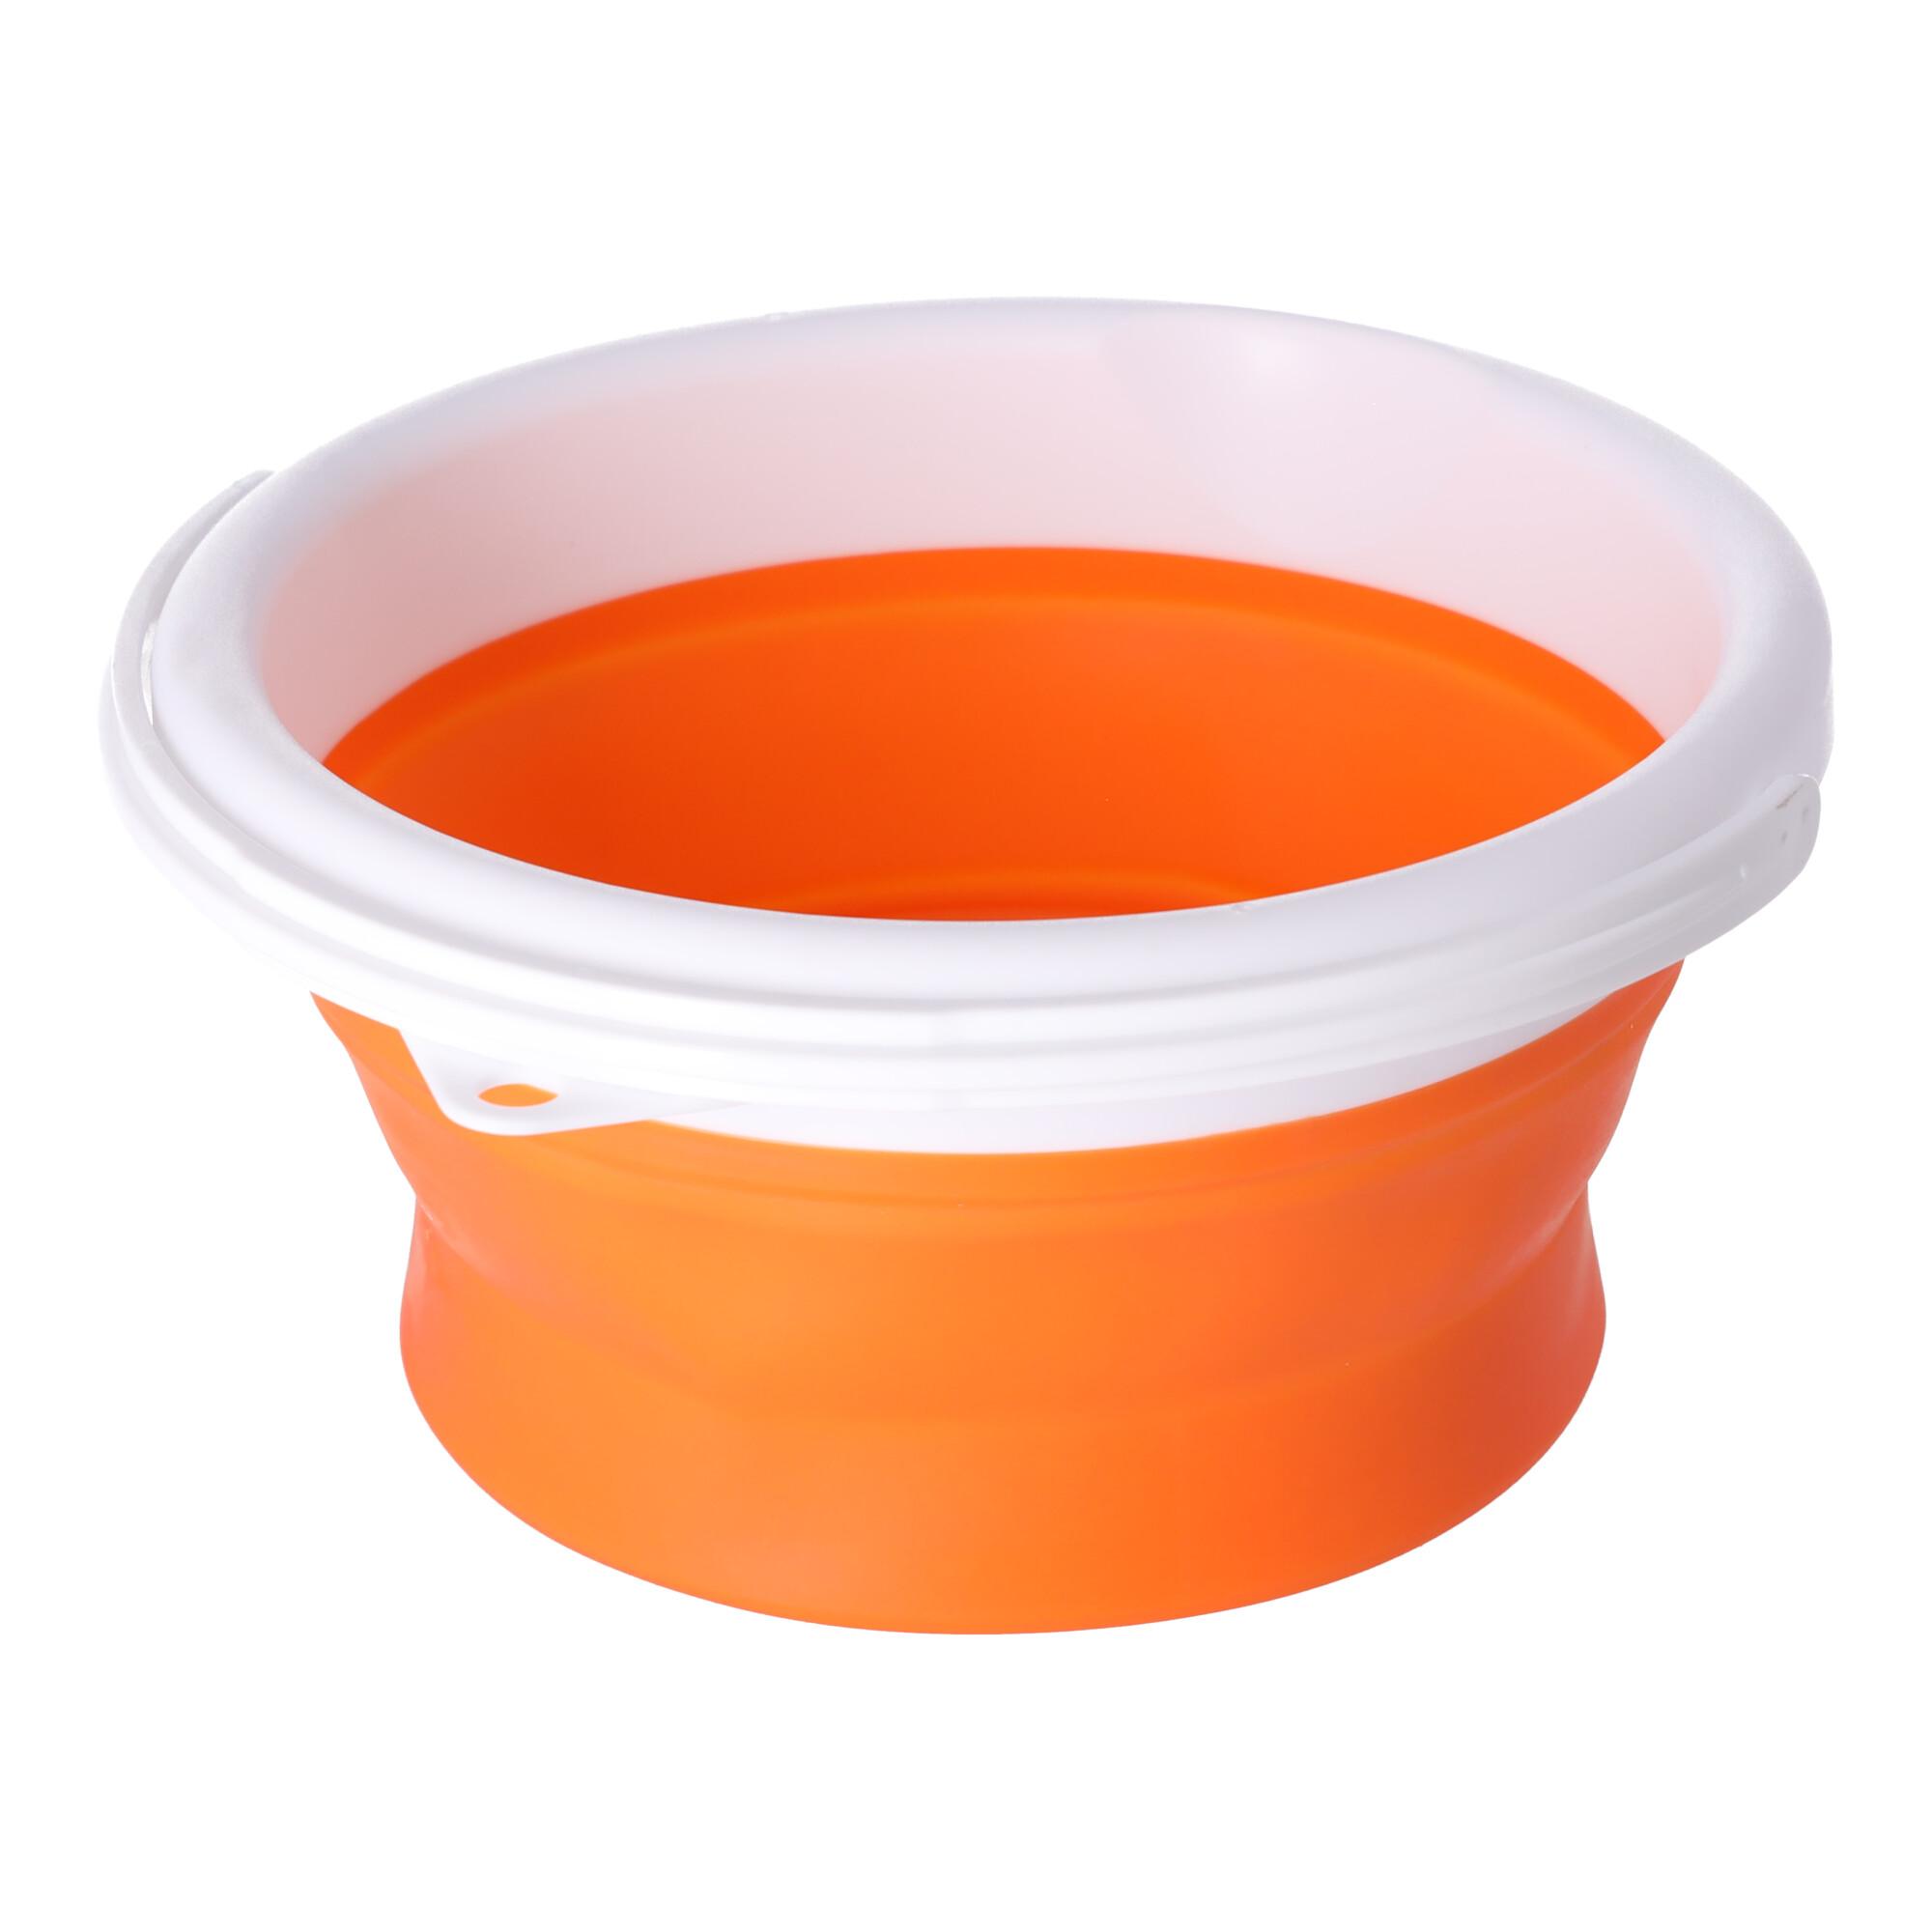 Silicone bucket 5L foldable - orange and white (with a lid)